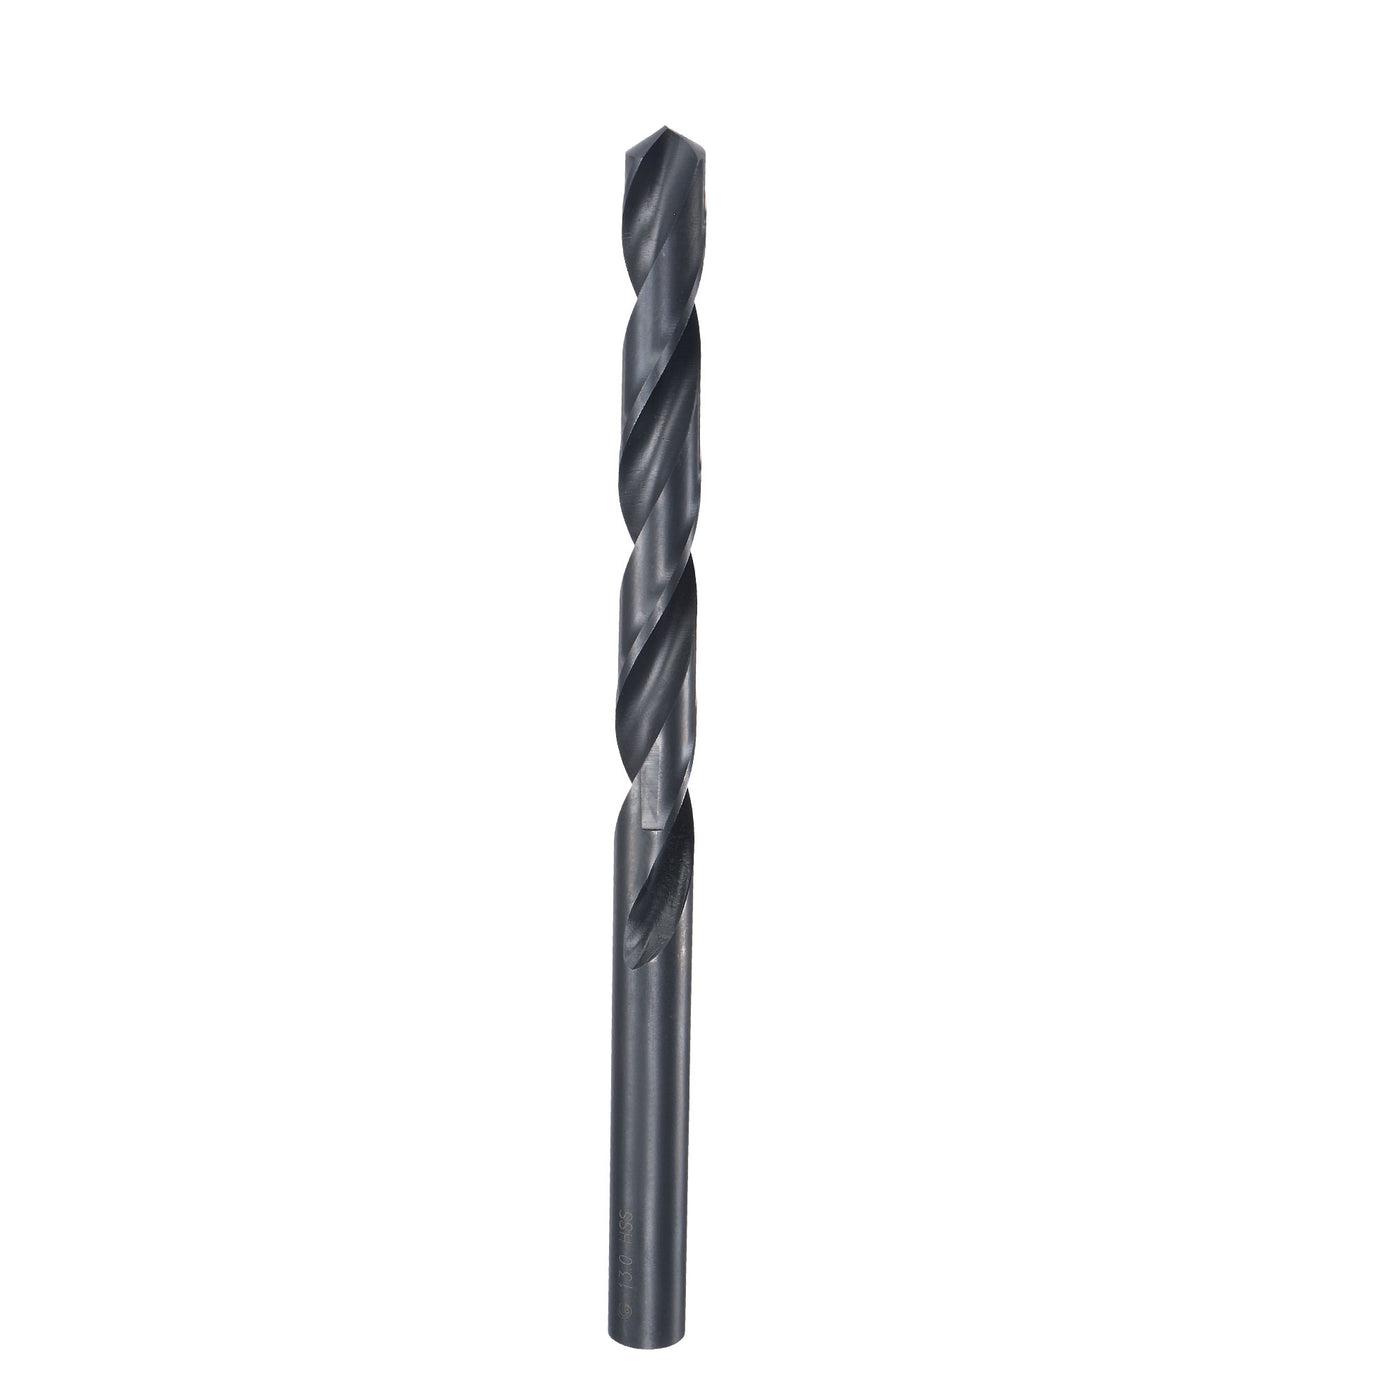 uxcell Uxcell High Speed Steel Lengthen Twist Drill Bit 13mm Fully Ground Black Oxide